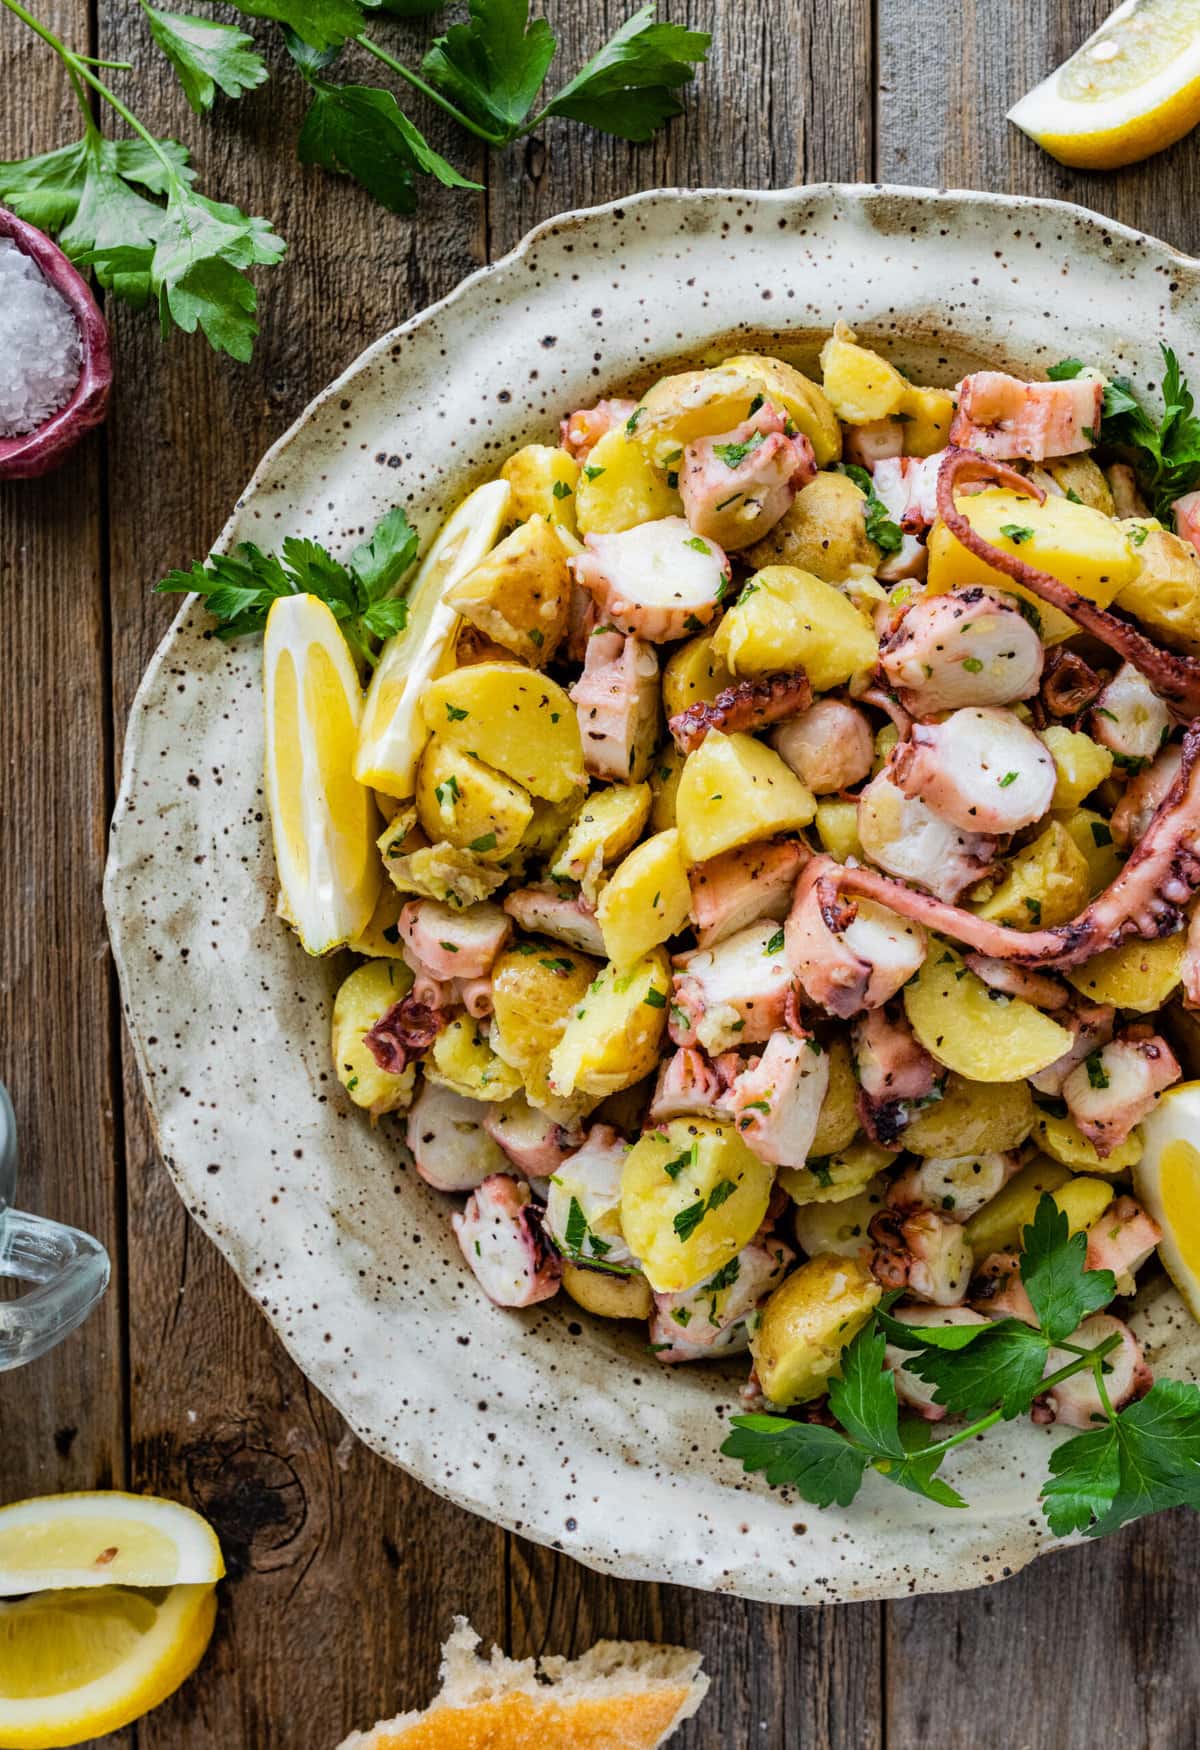 Italian Octopus Salad Recipe with Potatoes (Insalata Di Polpo) in a large round serving platter. Side of lemon, parley on top, and bread as a side.